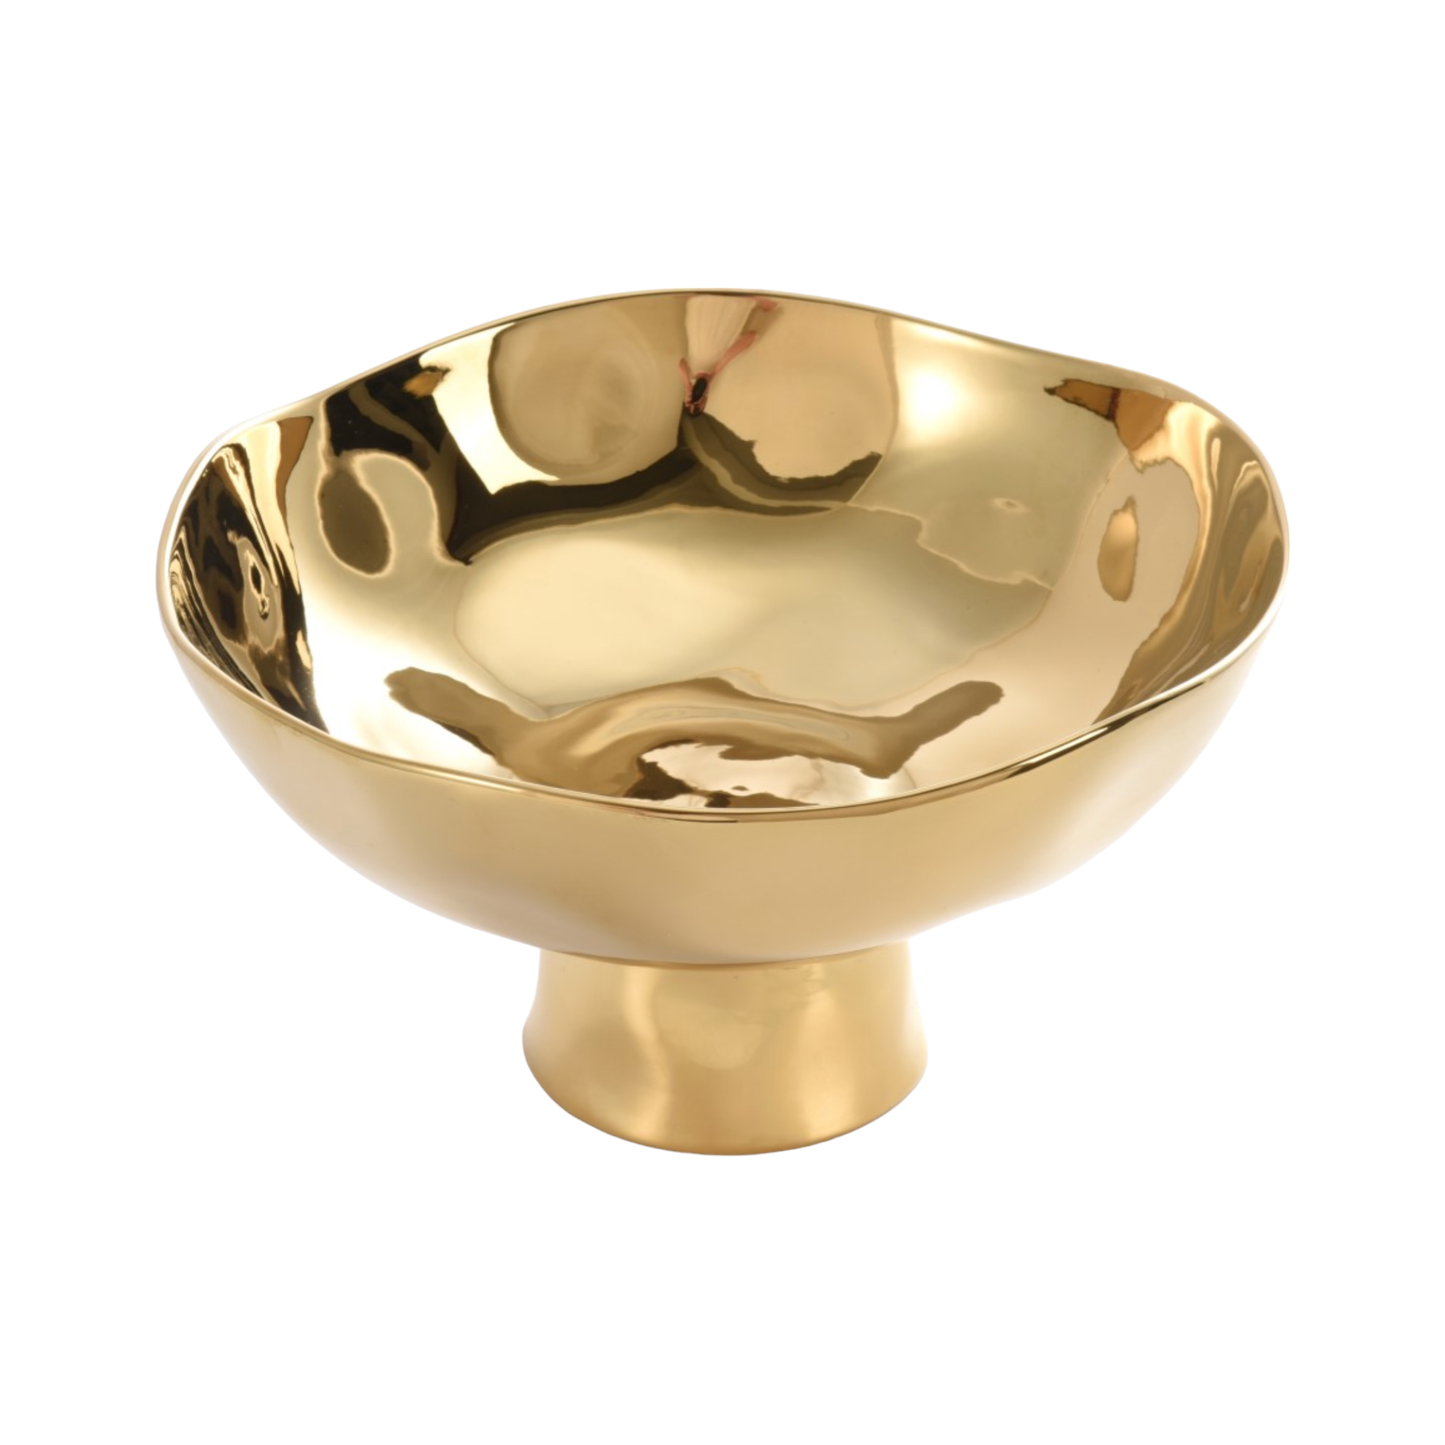 Footed Bowl - Moonlight Gold